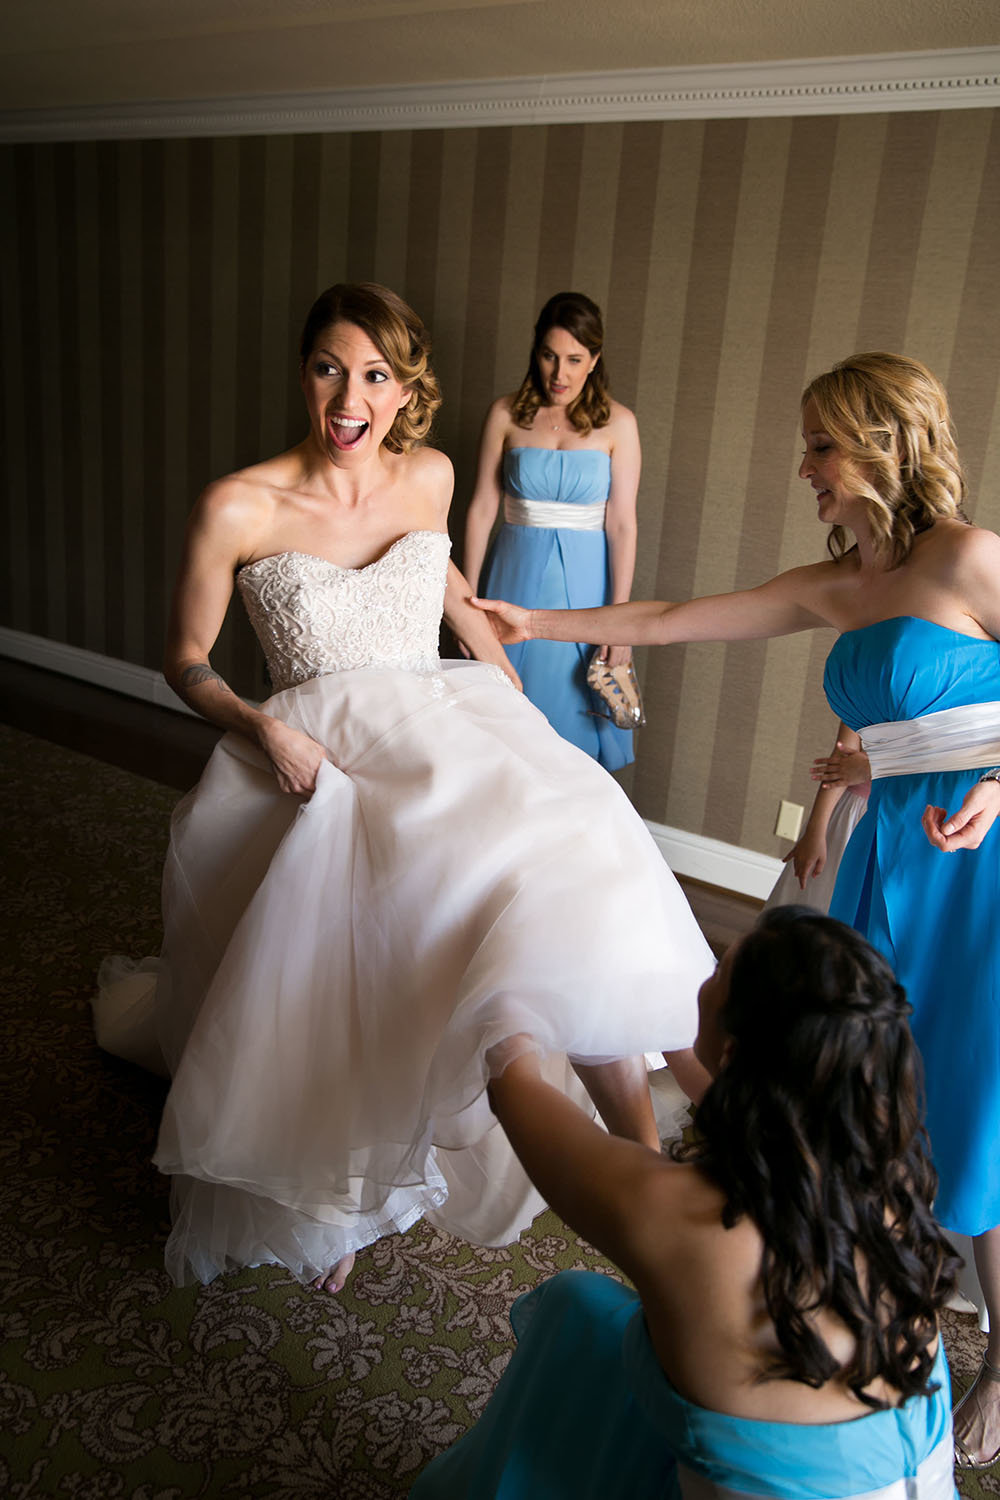 Bride and bridesmaids getting ready before the wedding ceremony